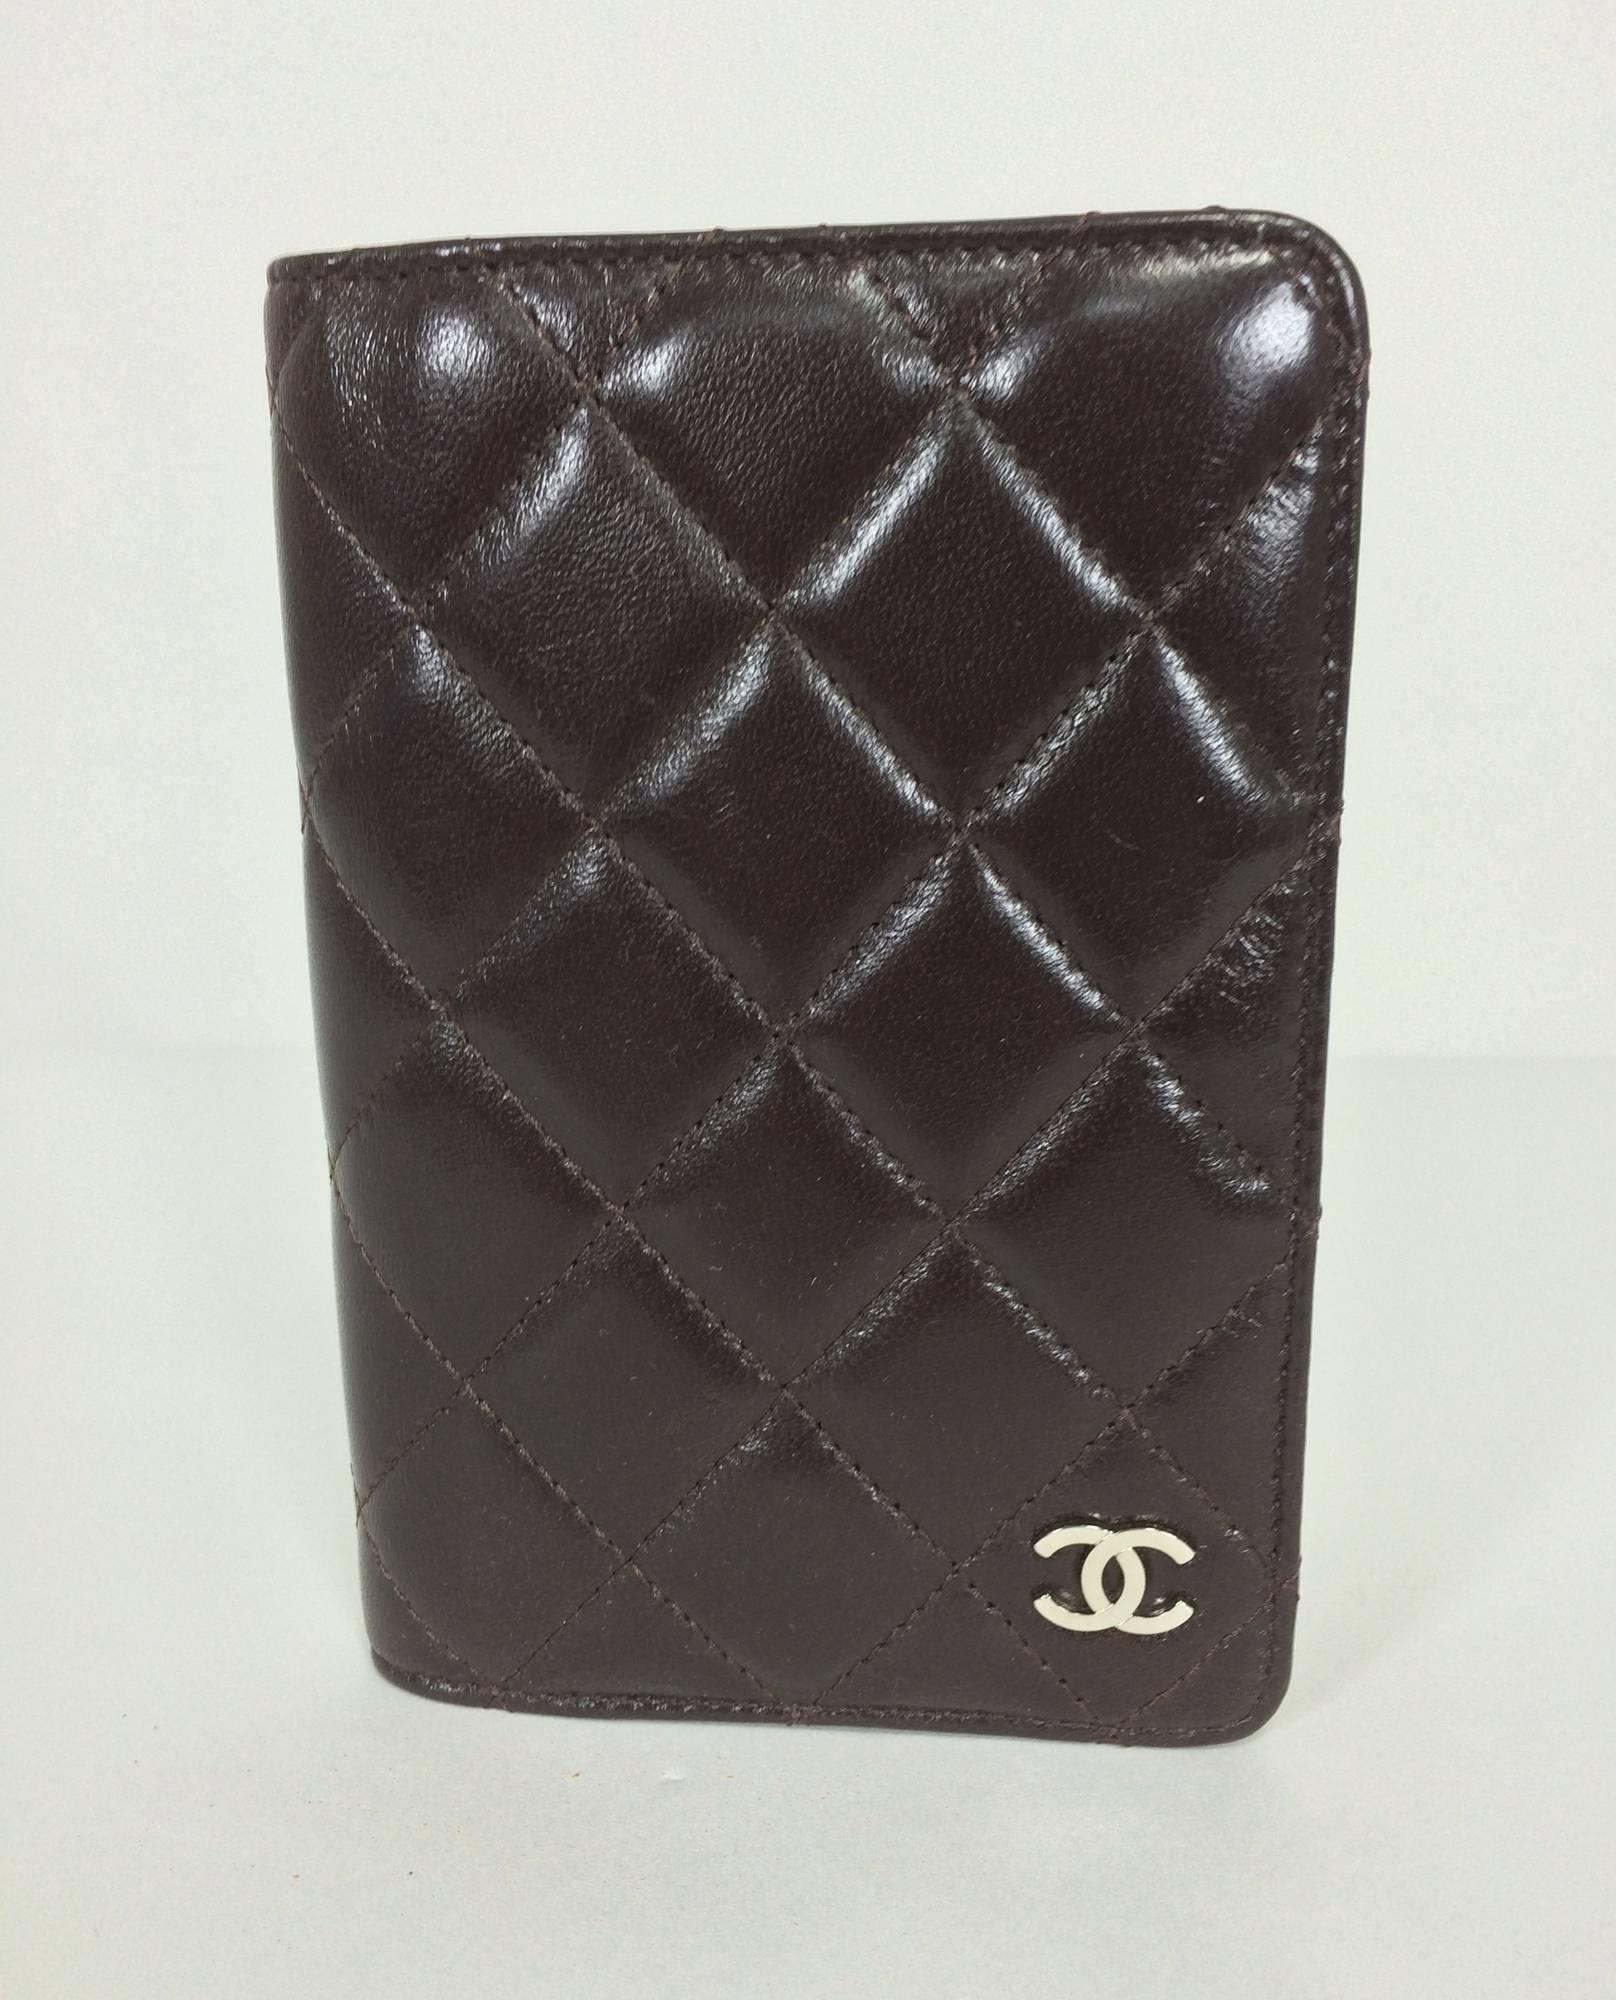 Chanel quilted leather datebook 2009 unused...Together with a Chanel paper note book...Chocolate brown soft quilted leather with double pockets (lined in brown faille) on the inside of the front cover and one compartment on the inside of the back